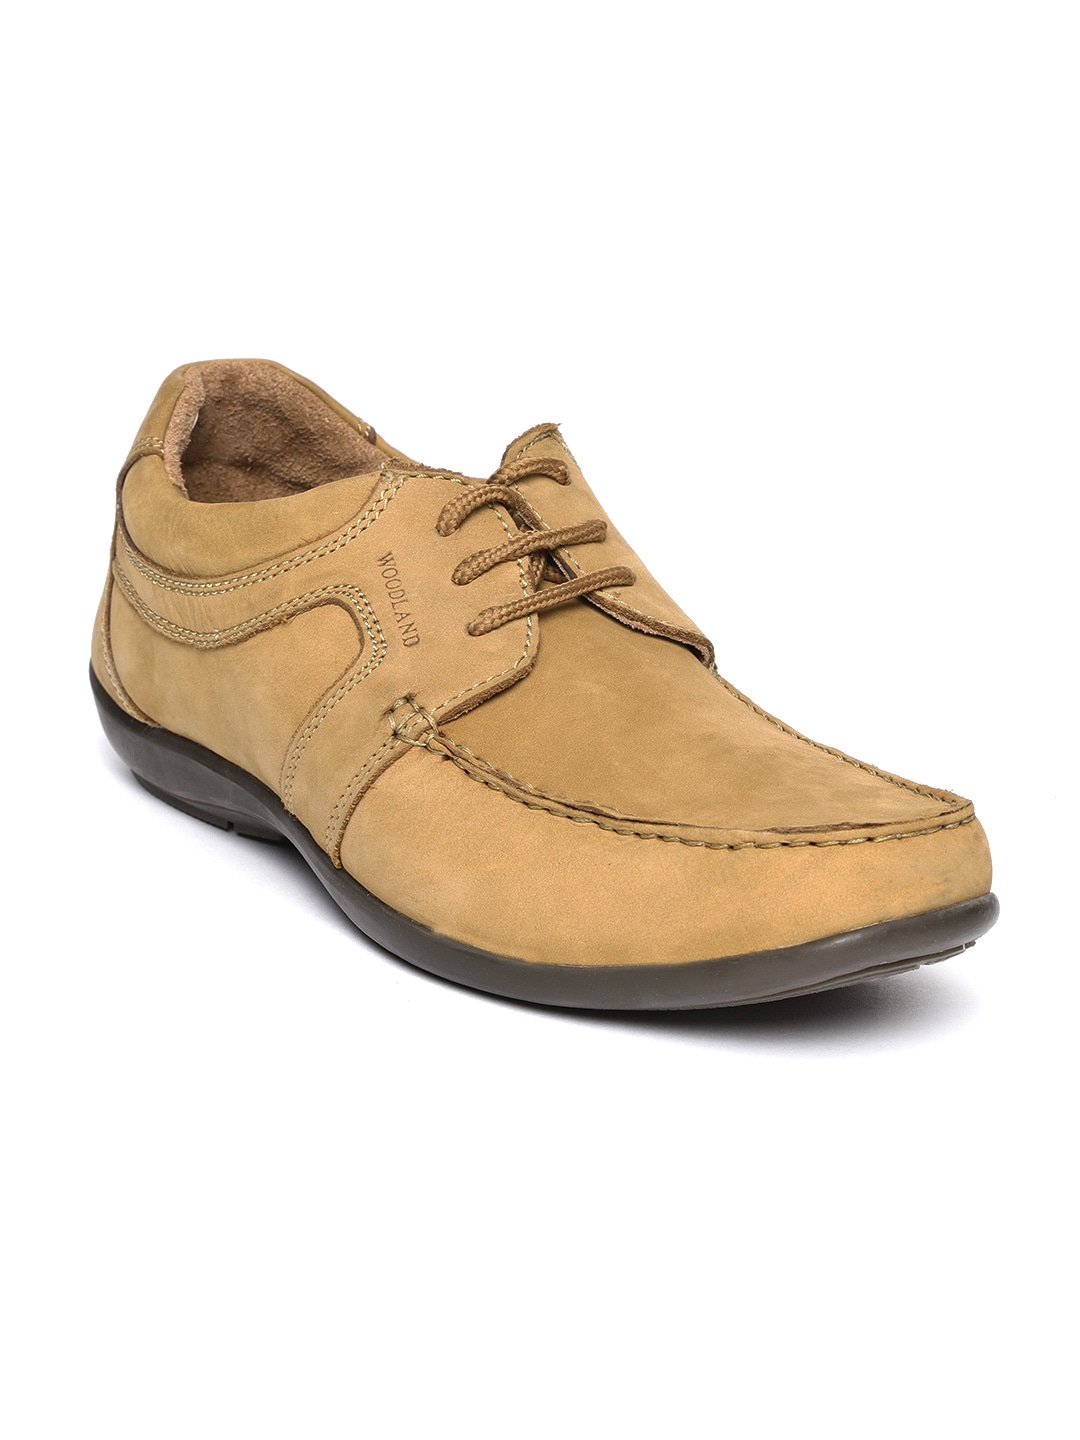 Woodland ProPlanet Men Camel Brown Nubuck Leather Sneakers